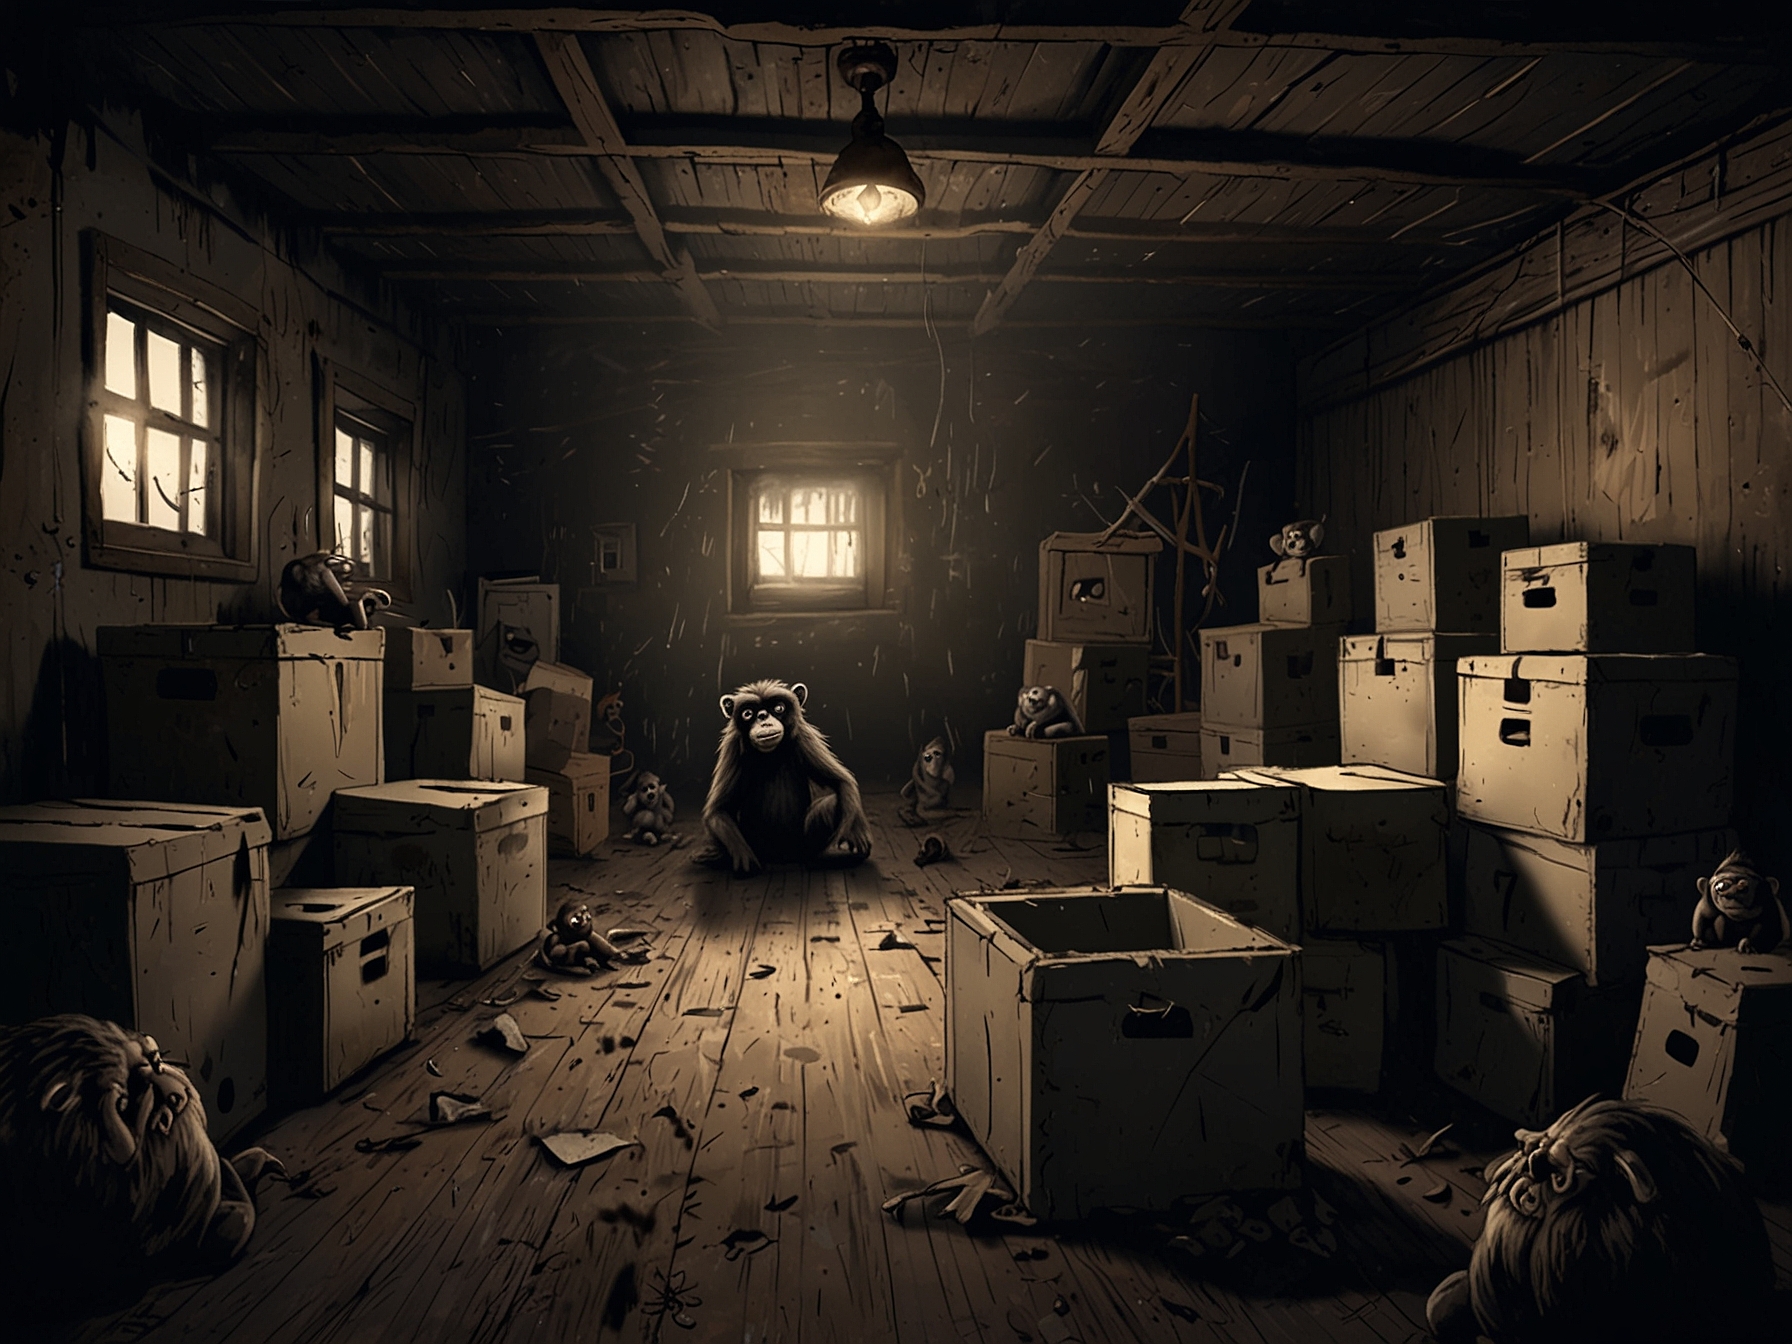 A dark, eerie attic filled with cobwebs and old boxes, with the sinister toy monkey at the center, symbolizing the terror about to unfold.